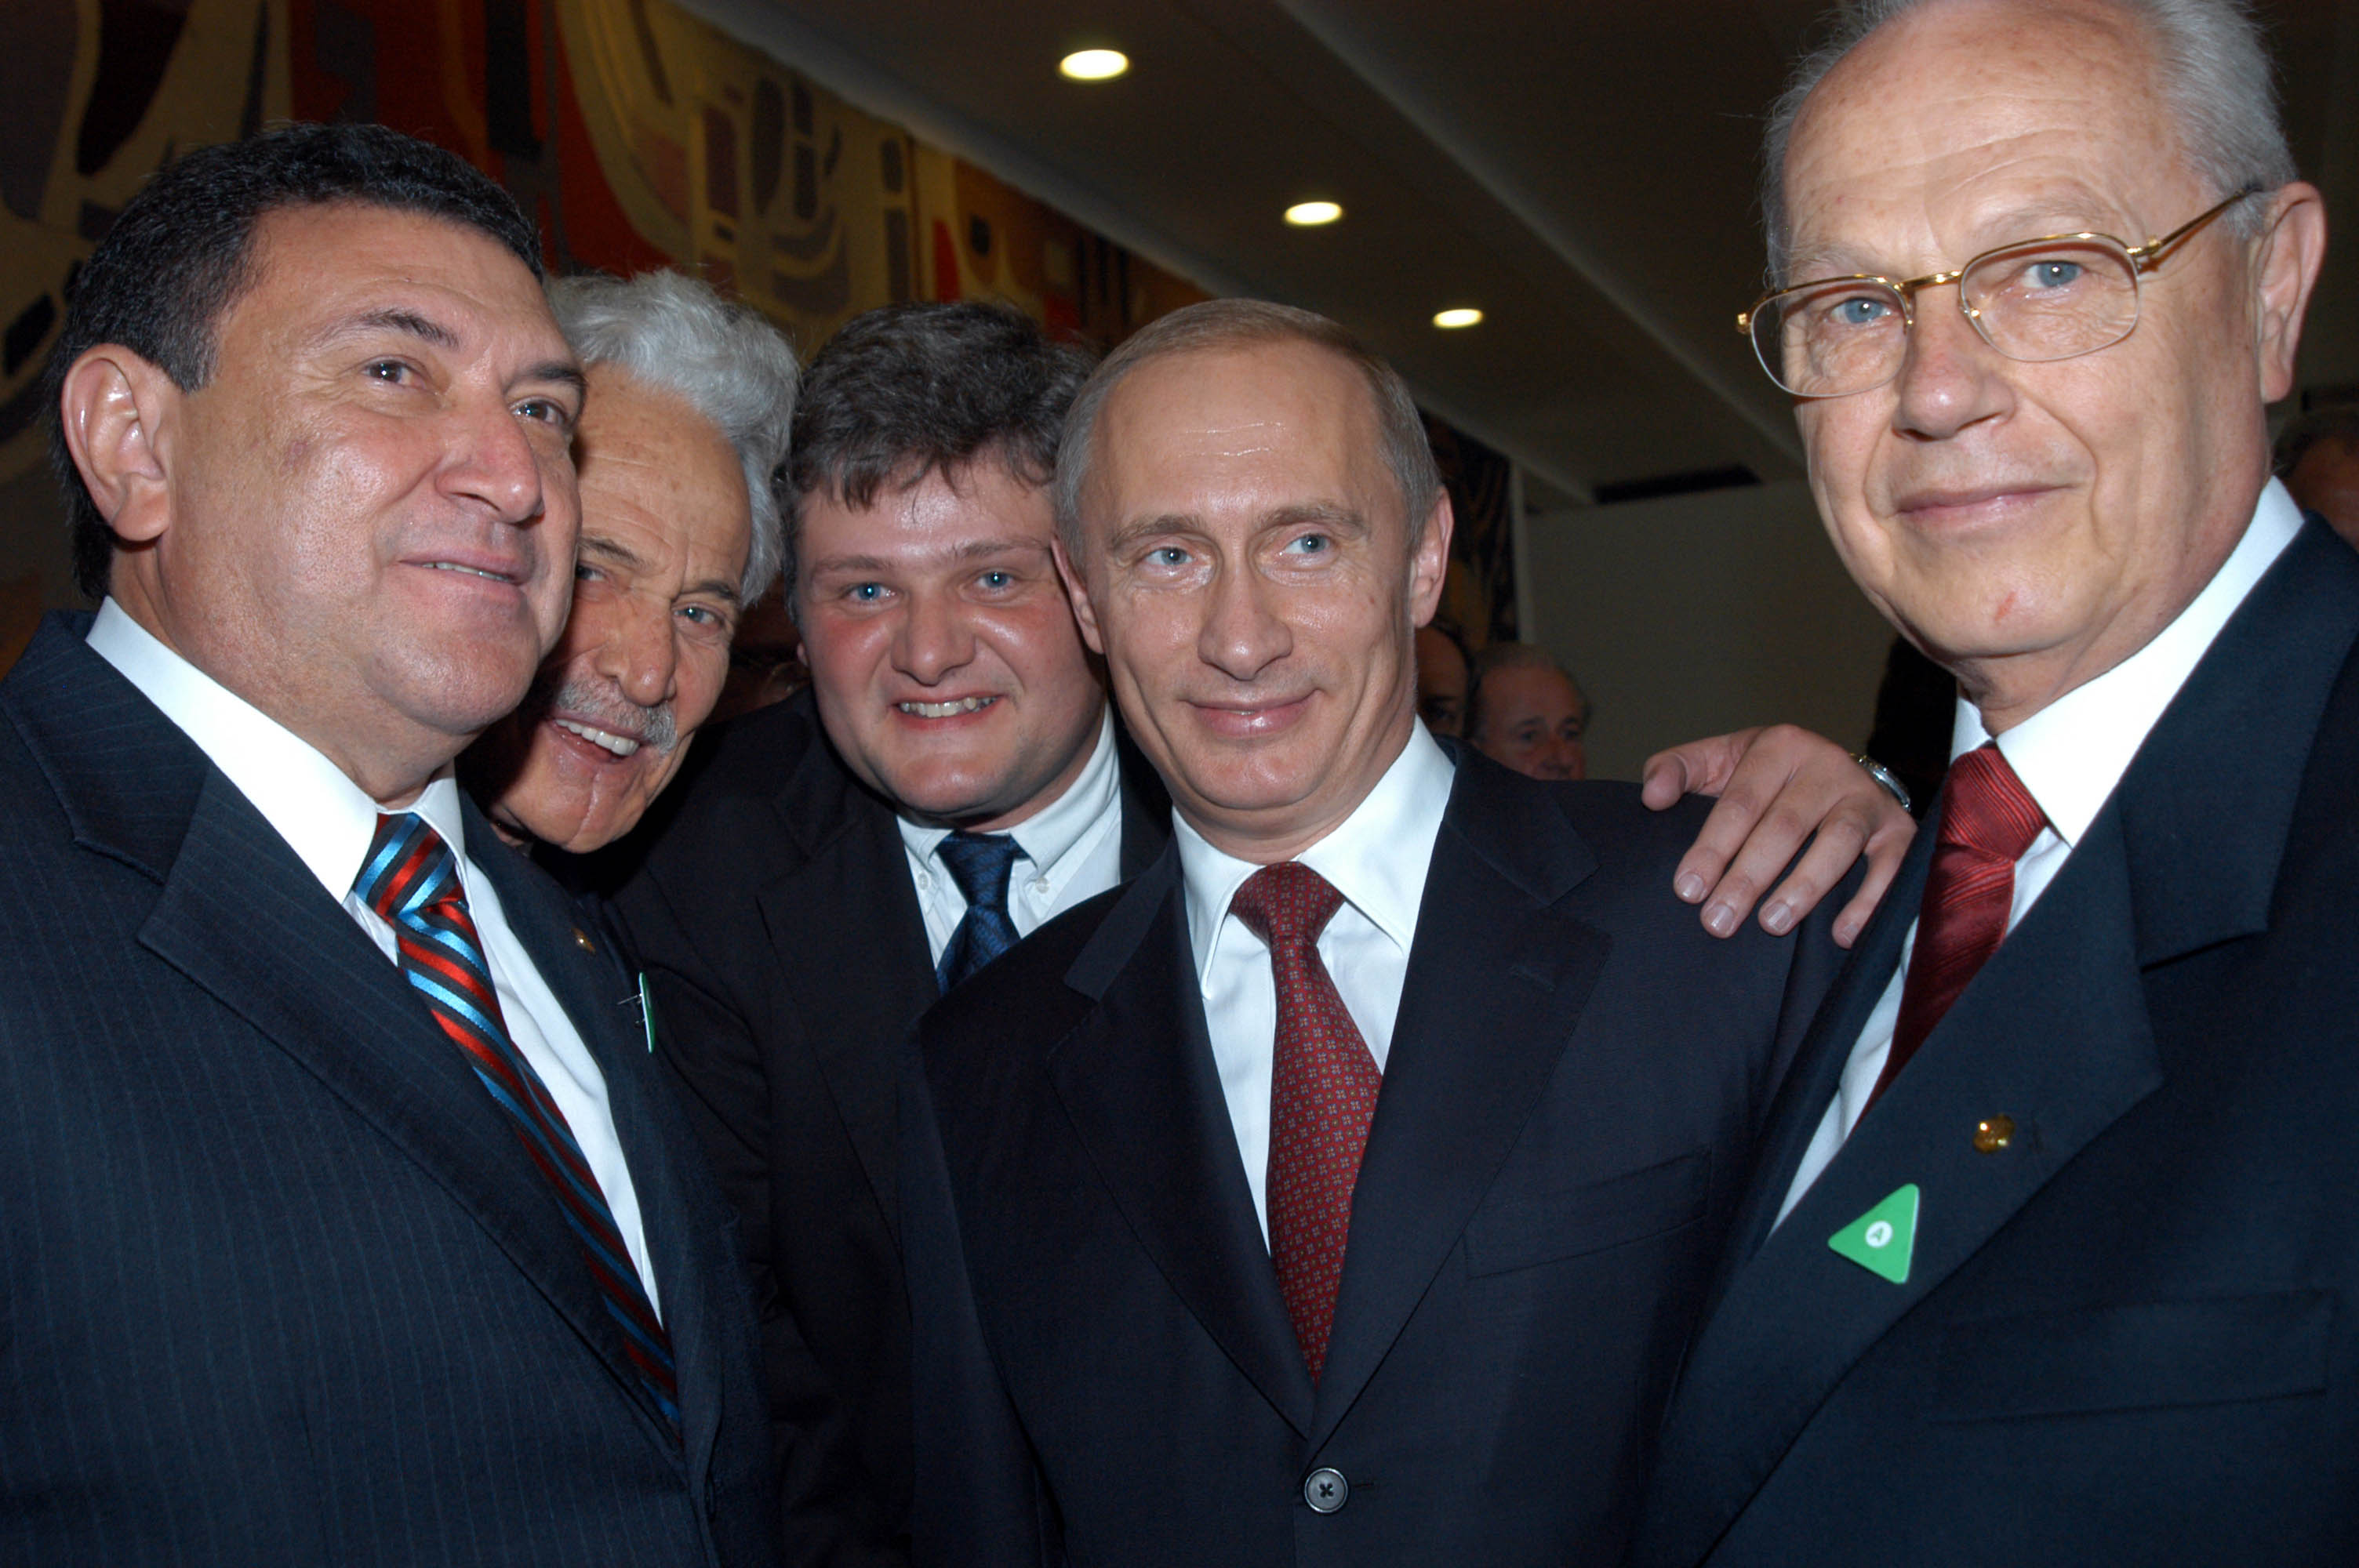 Mr. Vladimir Putin, President of Federation of Russia and Mr. Antonio Carlos Rosset Filho, President of the Brazilian Russian Chamber of Commerce and Industry